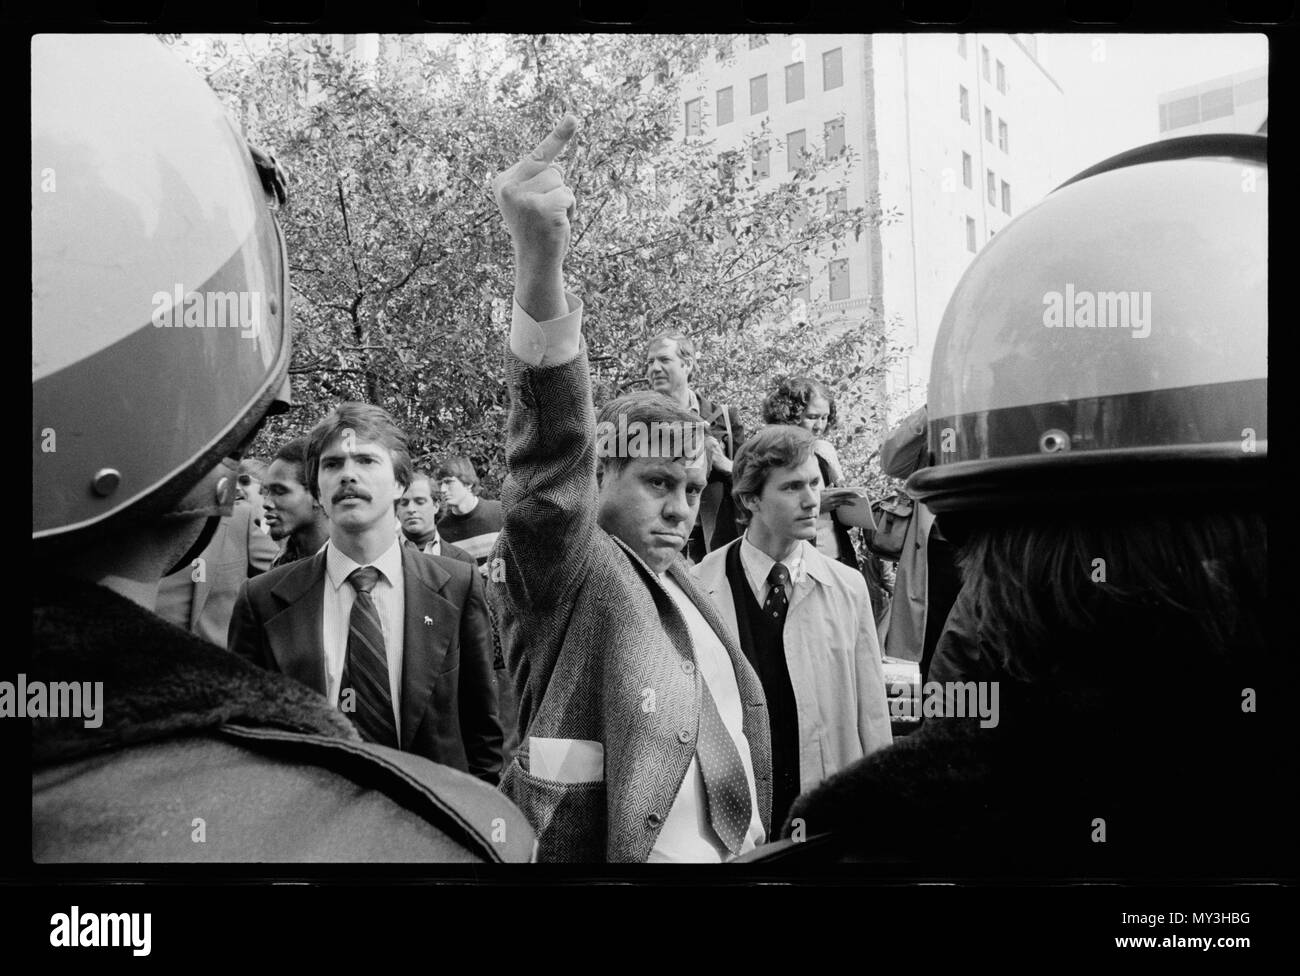 A protester uses his middle finger to express anger and frustration at the ongoing Iran Hostage Crisis, Washington, DC, 11/9/1979. Photo by Marion S. Trikosko. Stock Photo